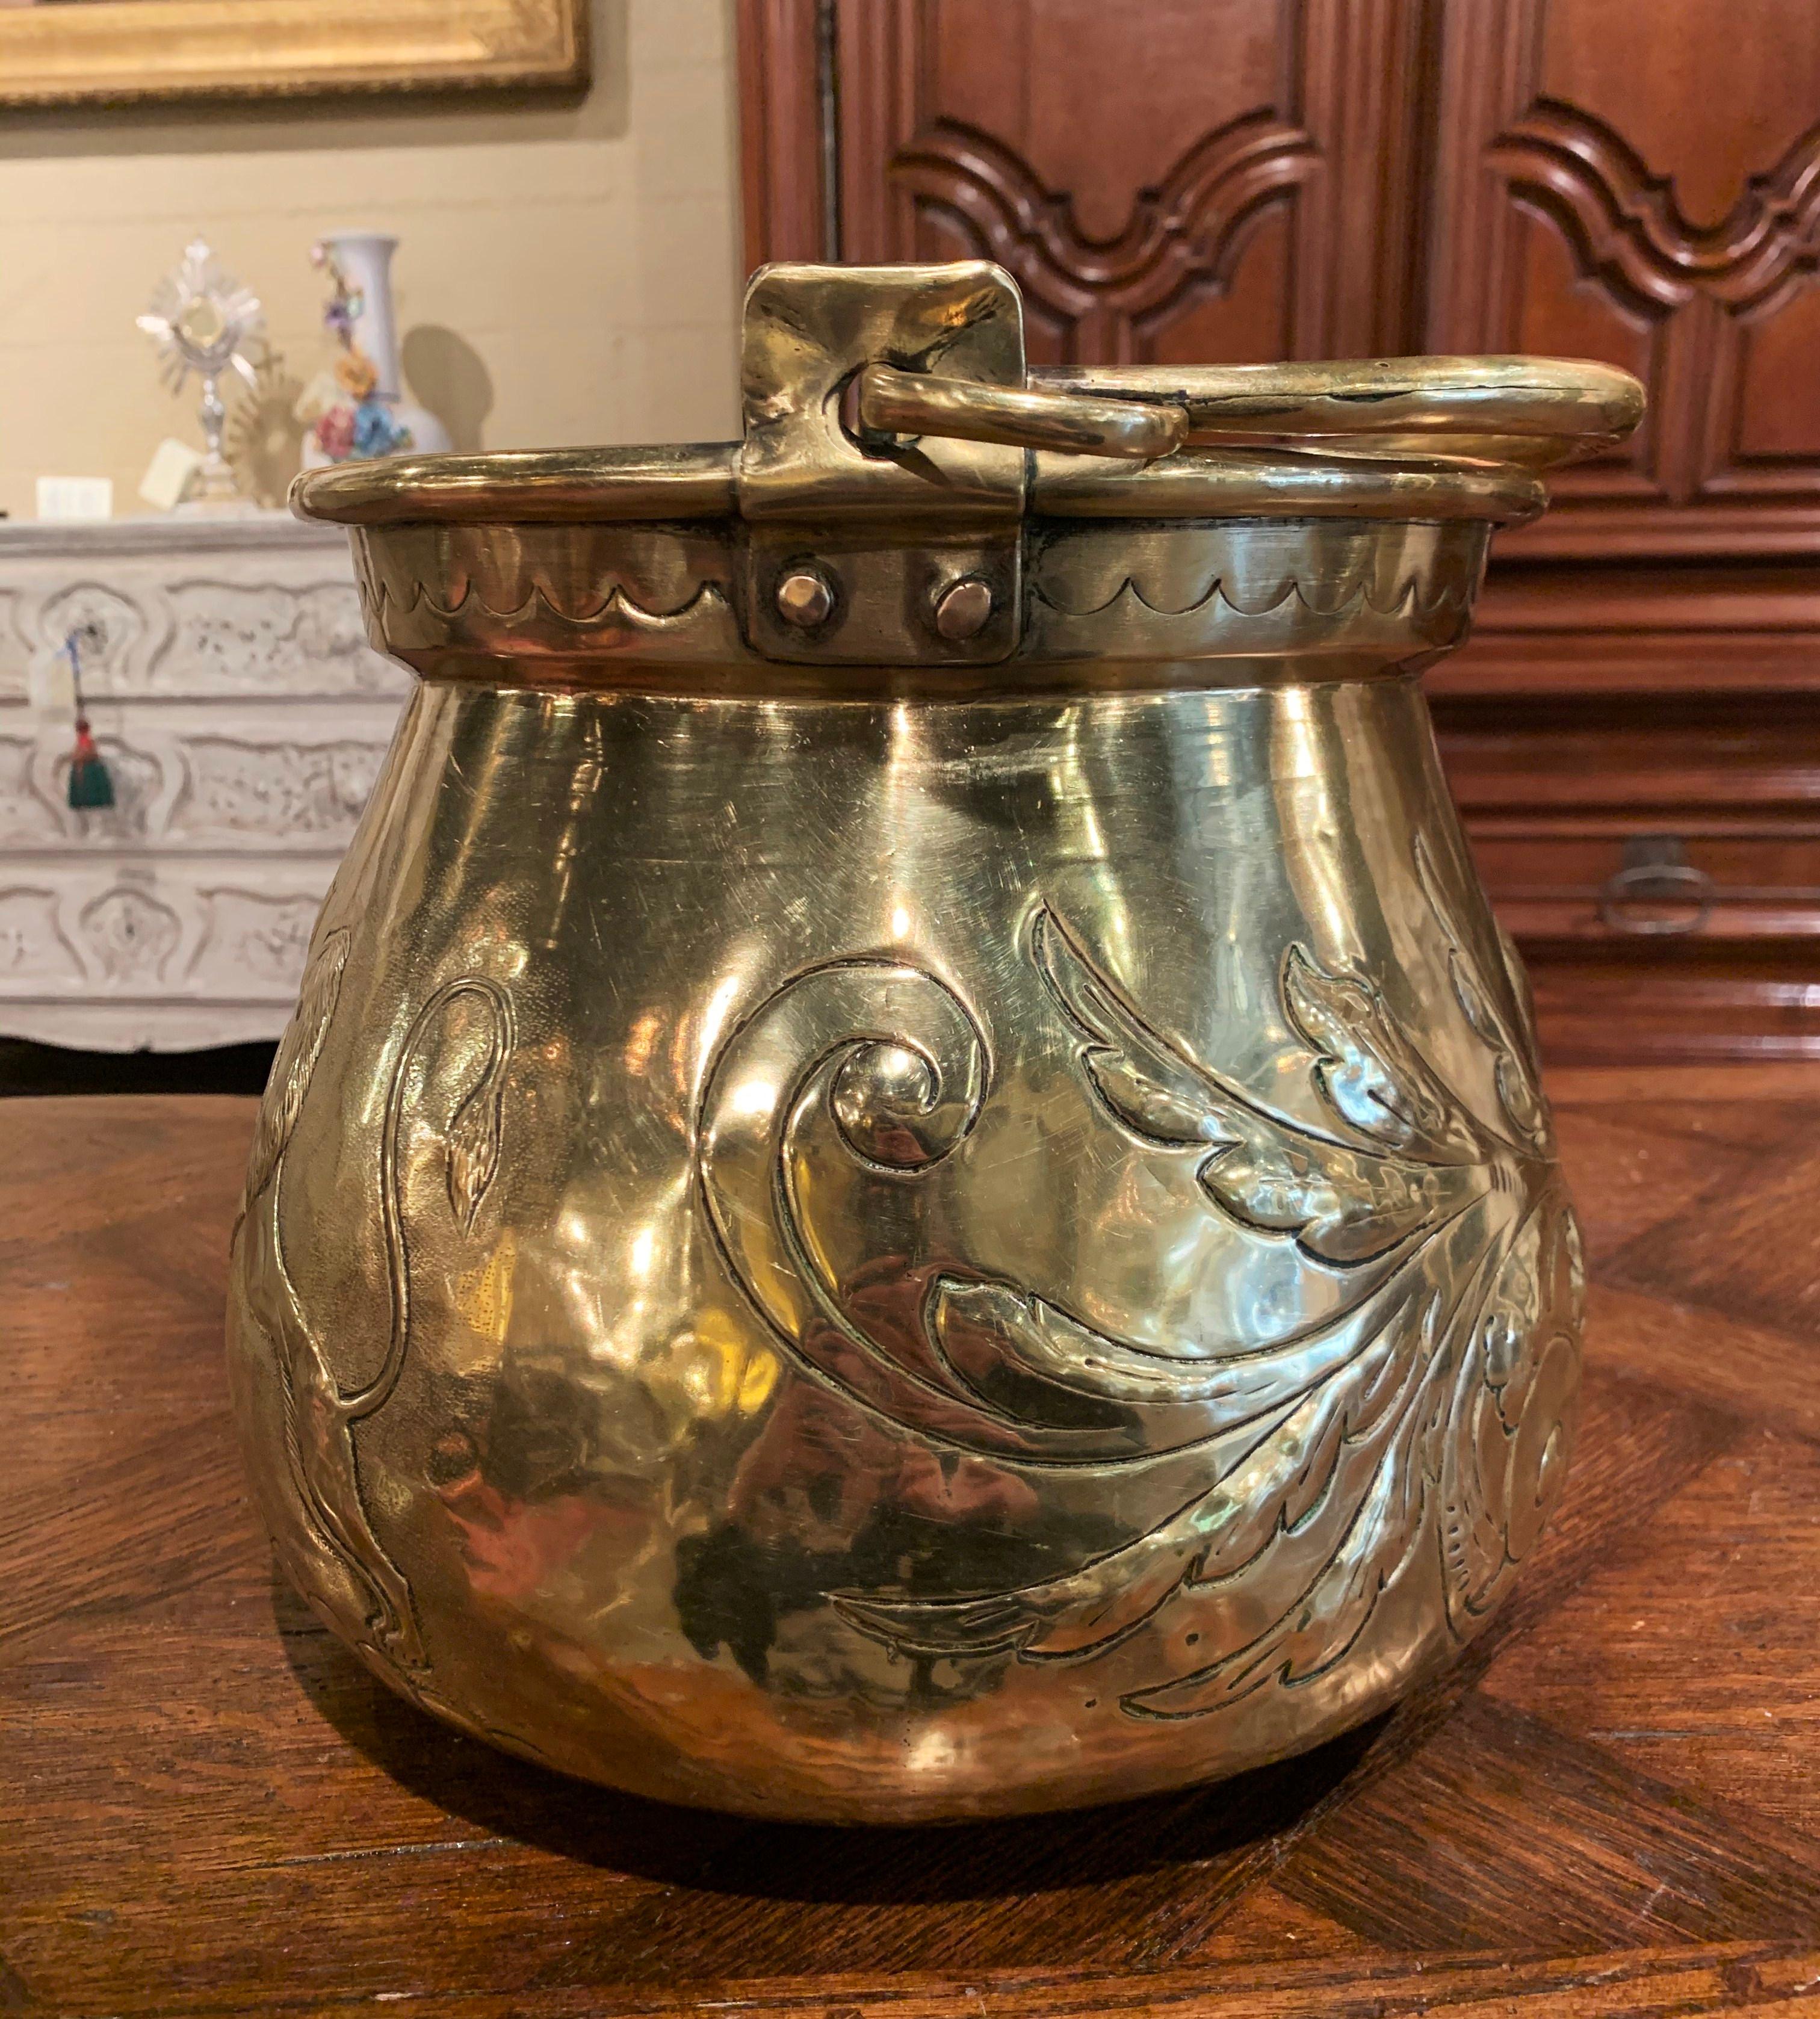 Late 17th Century French Louis XIV Brass Cauldron with Fleur de Lys and Crest 3